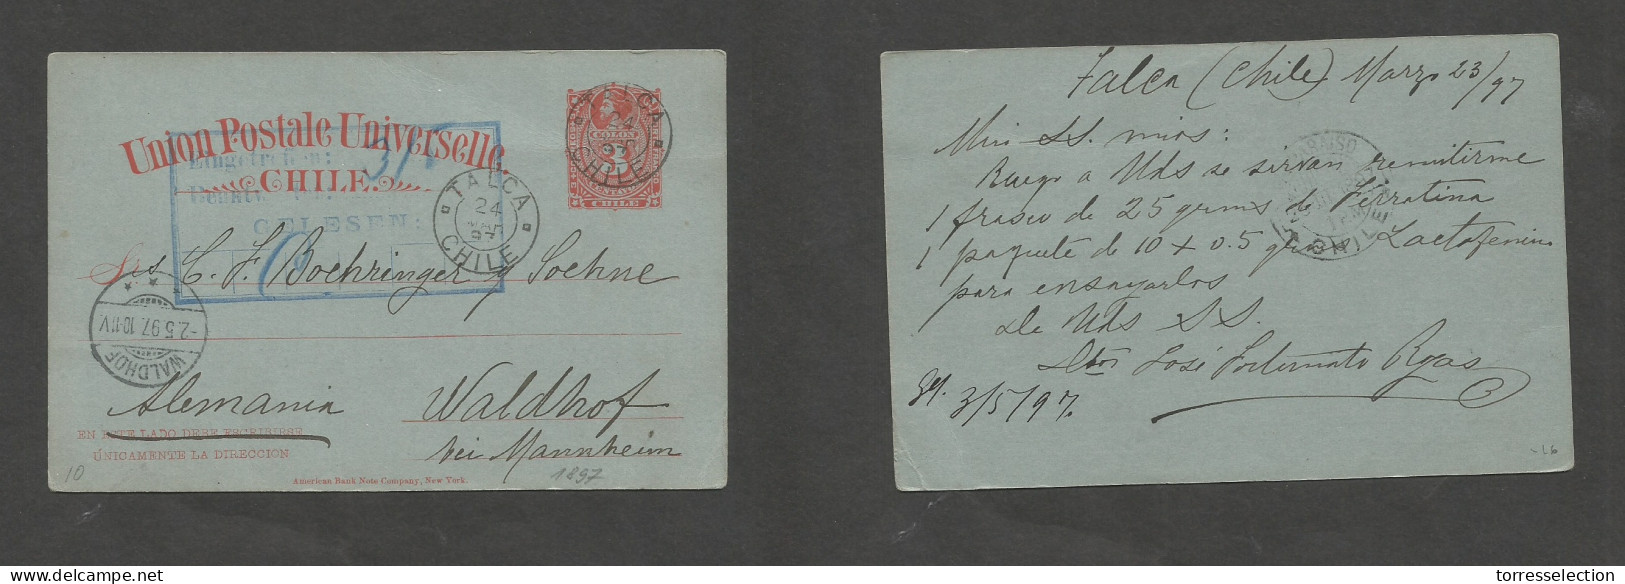 CHILE - Stationery. 1897 (23 March) Talca - Germany, Wald Hof (2 May) 3c Red, Bluish Stat Card. Fine Used. SALE. - Chile